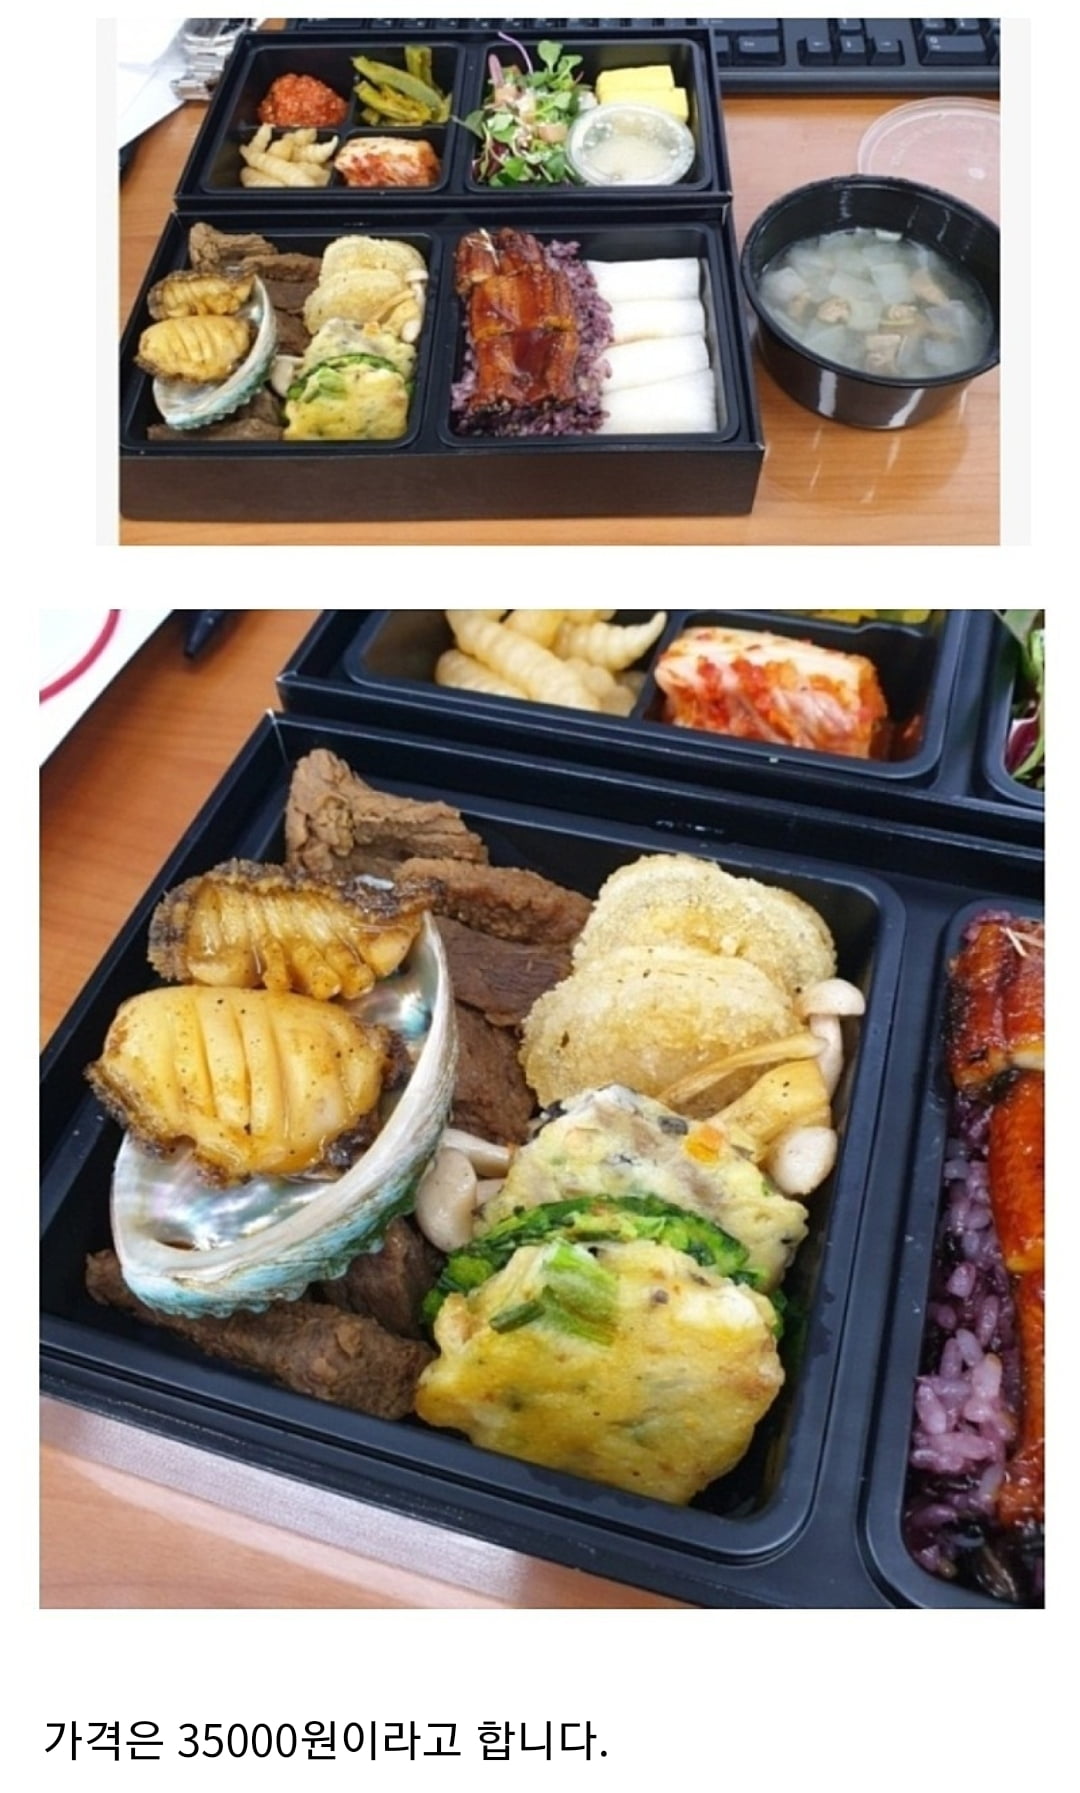 The lunch box that Vice Chairman Lee Jaeyong ate during the prosecution's investigation.